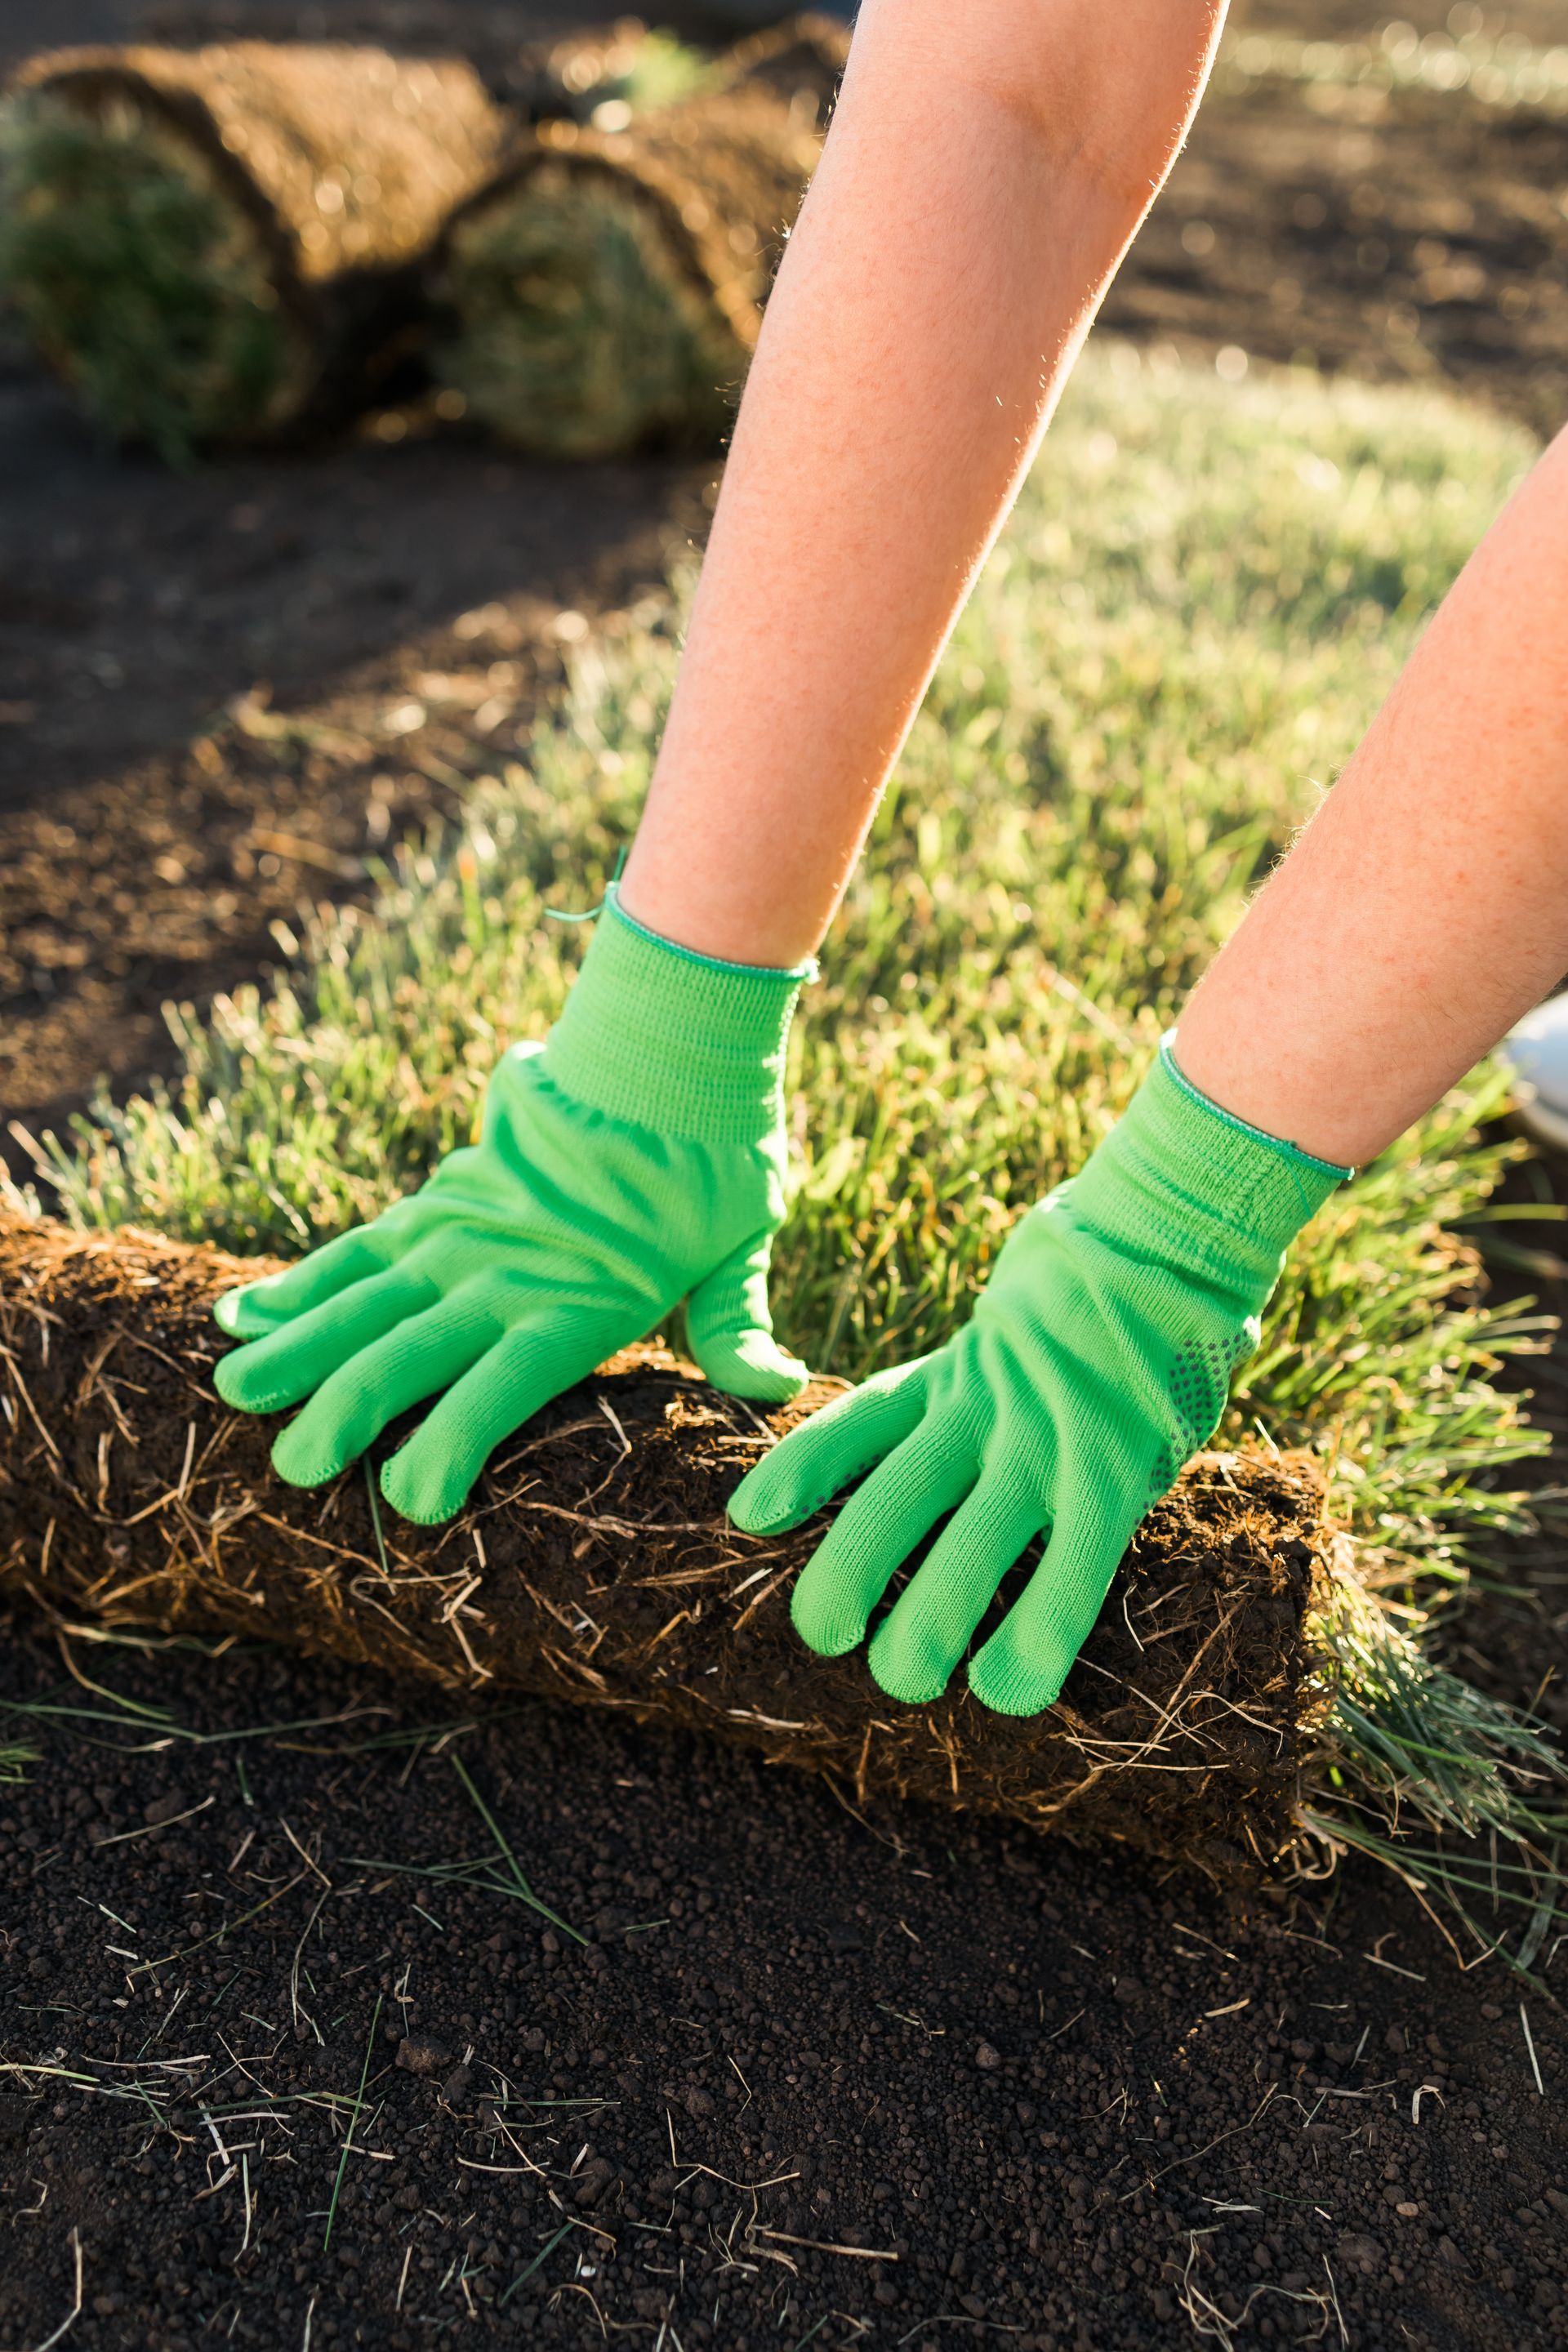 A person wearing green gloves is rolling a roll of grass.